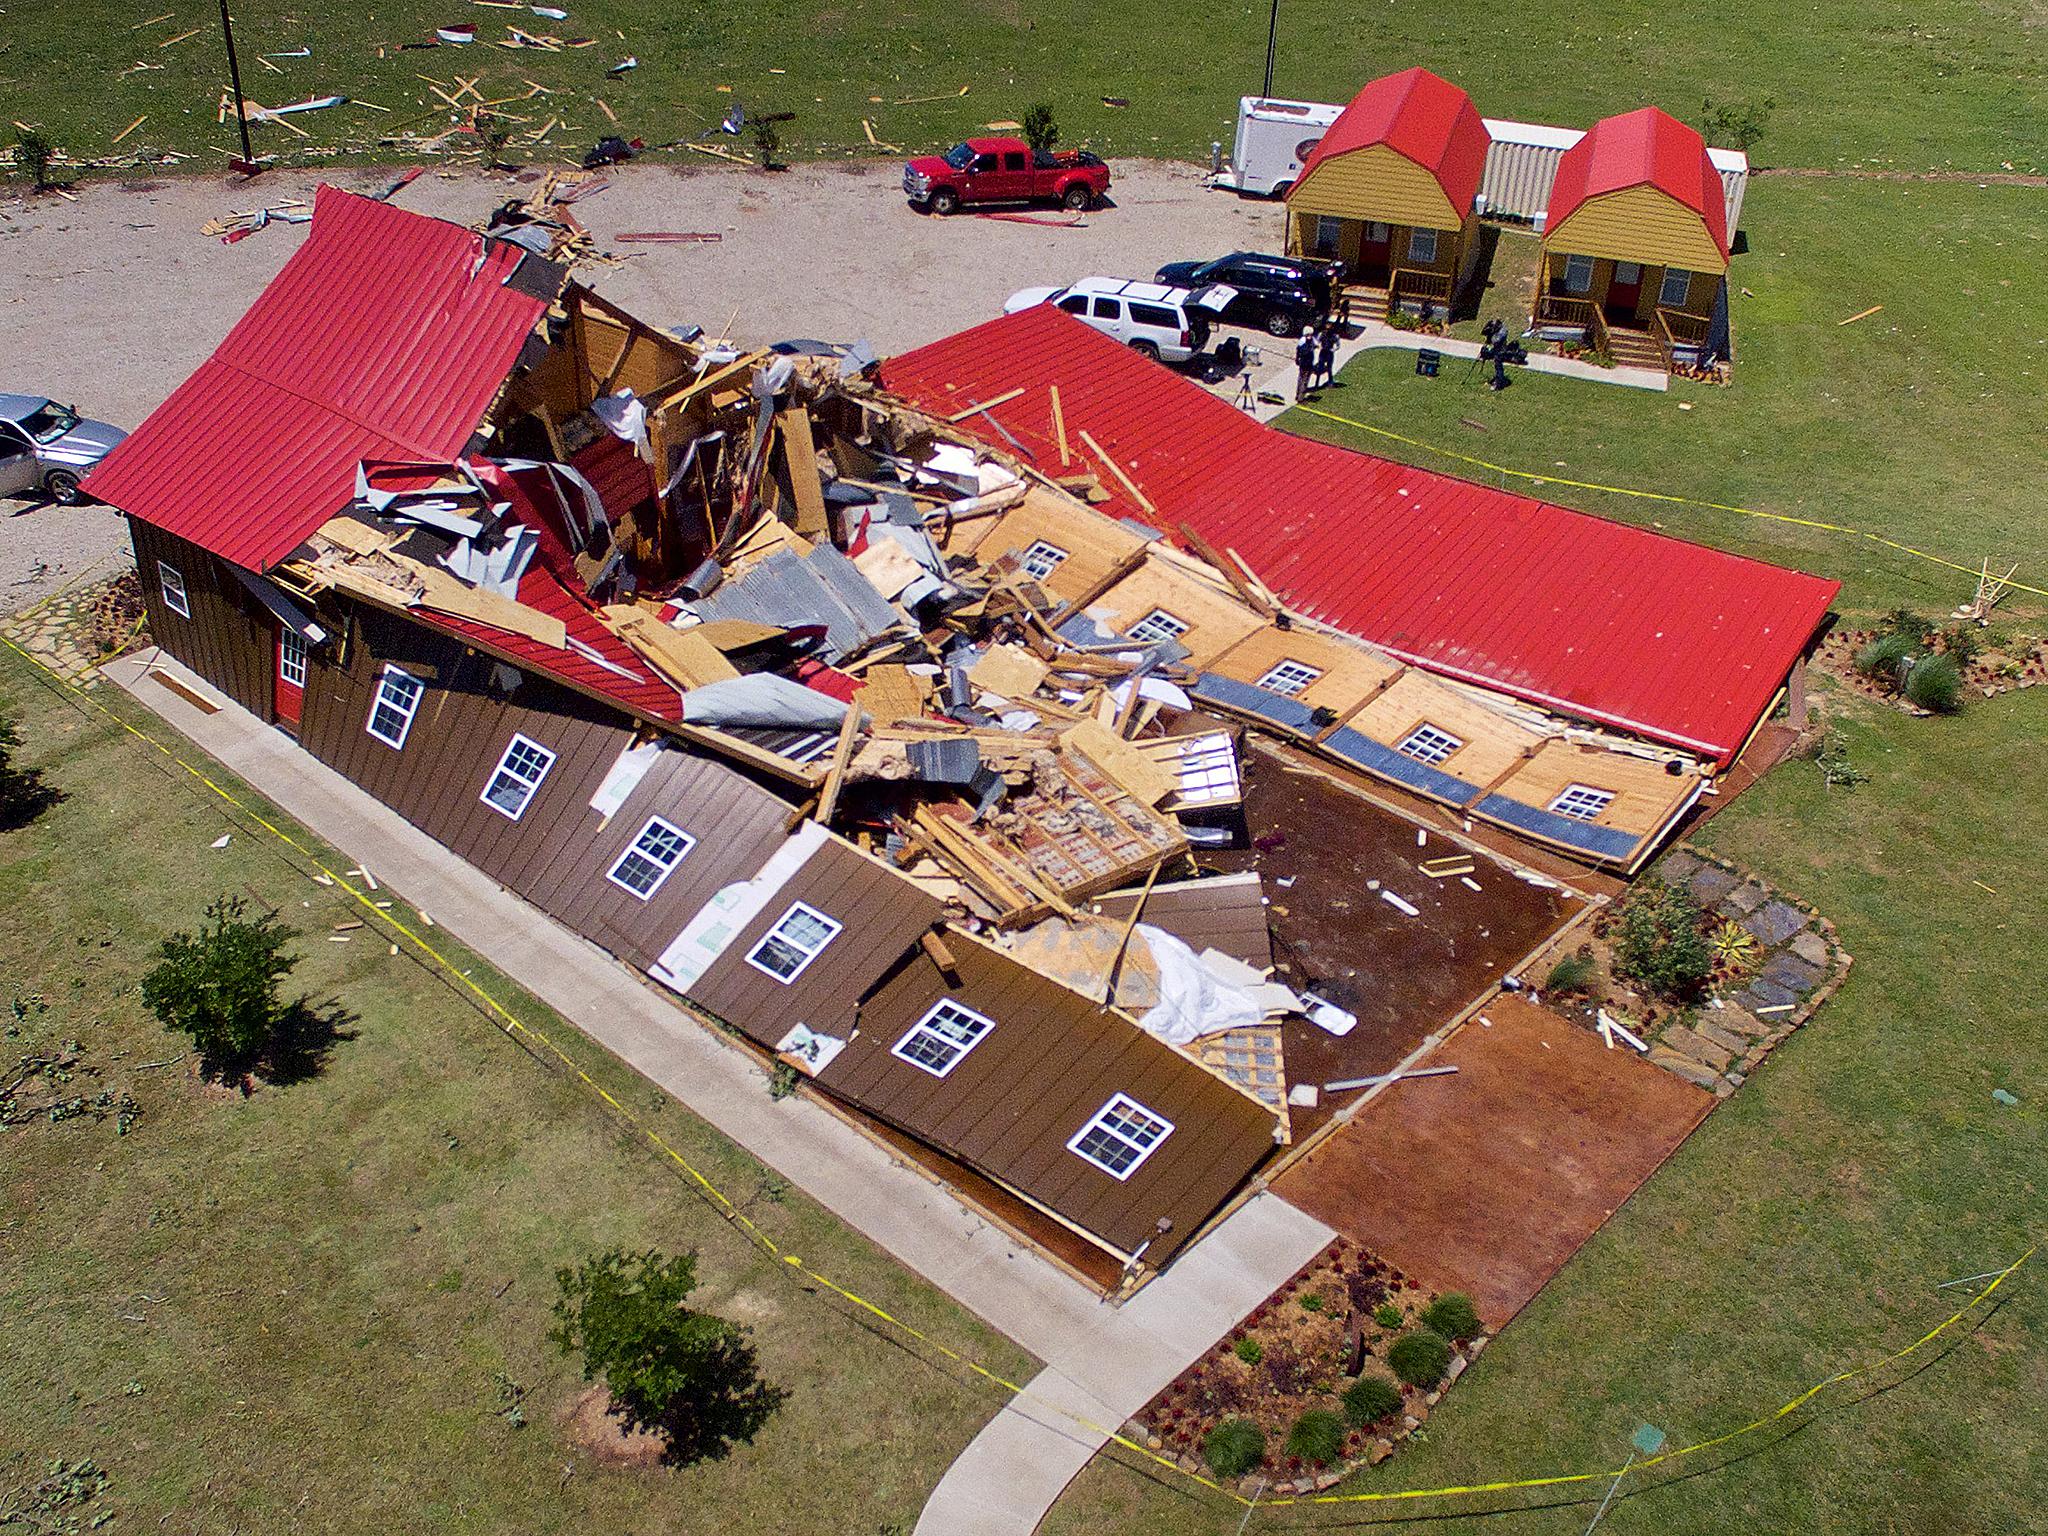 The Rustic Barn event hall was flattened by a tornado in Canton, Texas